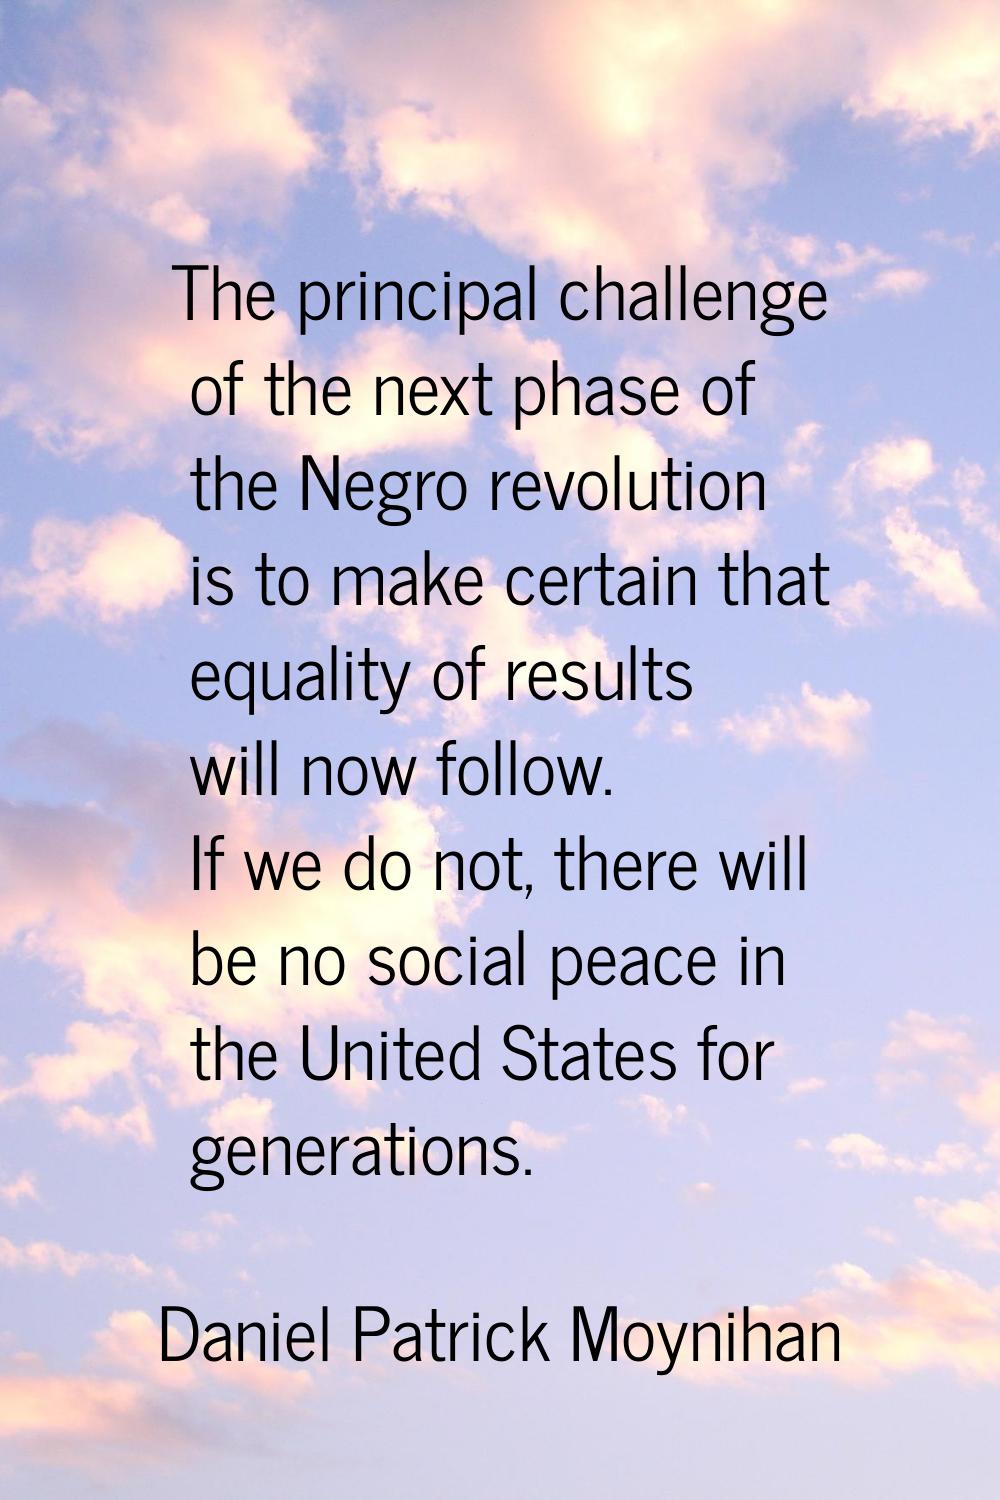 The principal challenge of the next phase of the Negro revolution is to make certain that equality 